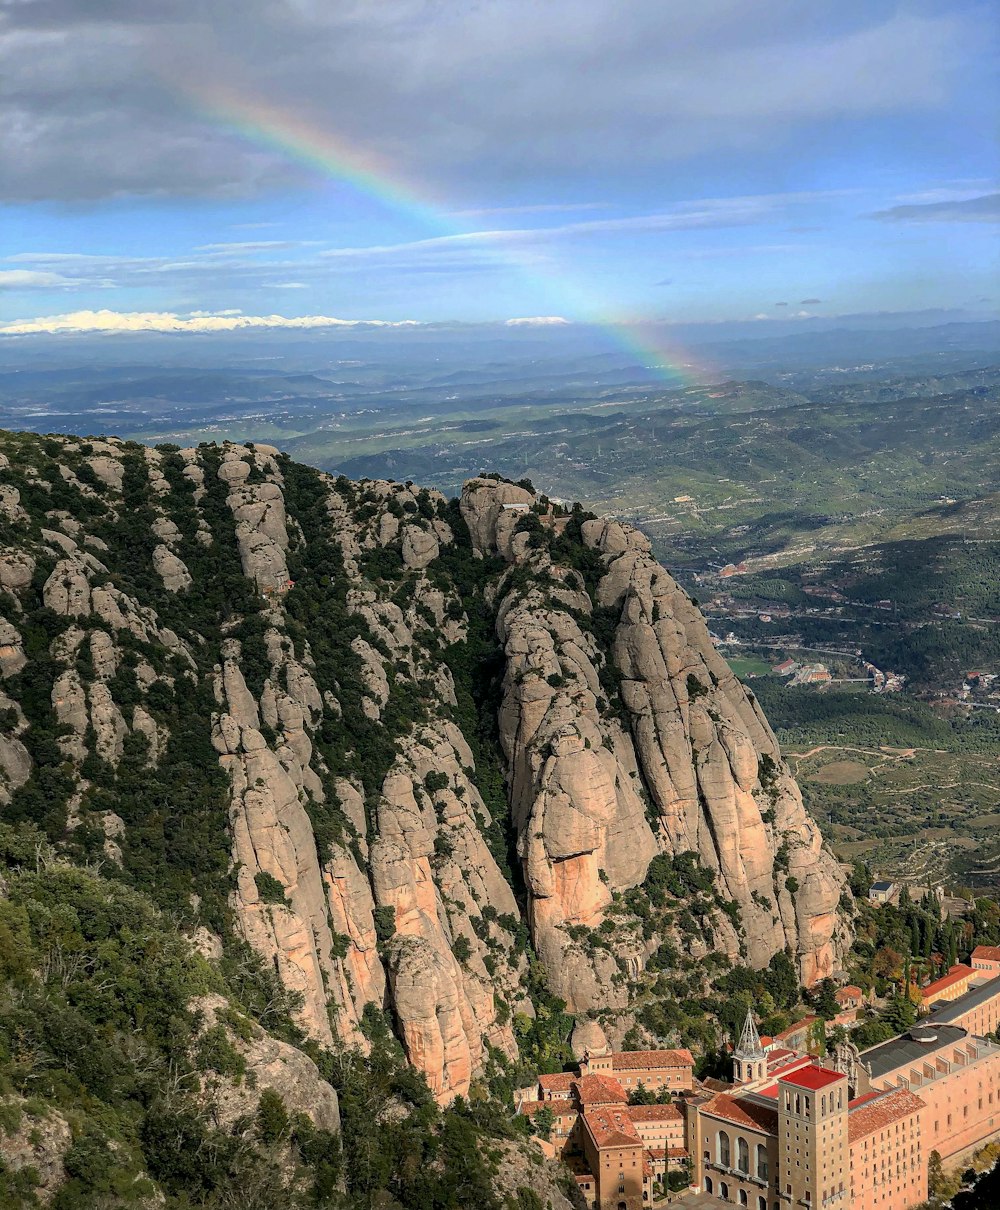 a rainbow shines in the sky over a mountain